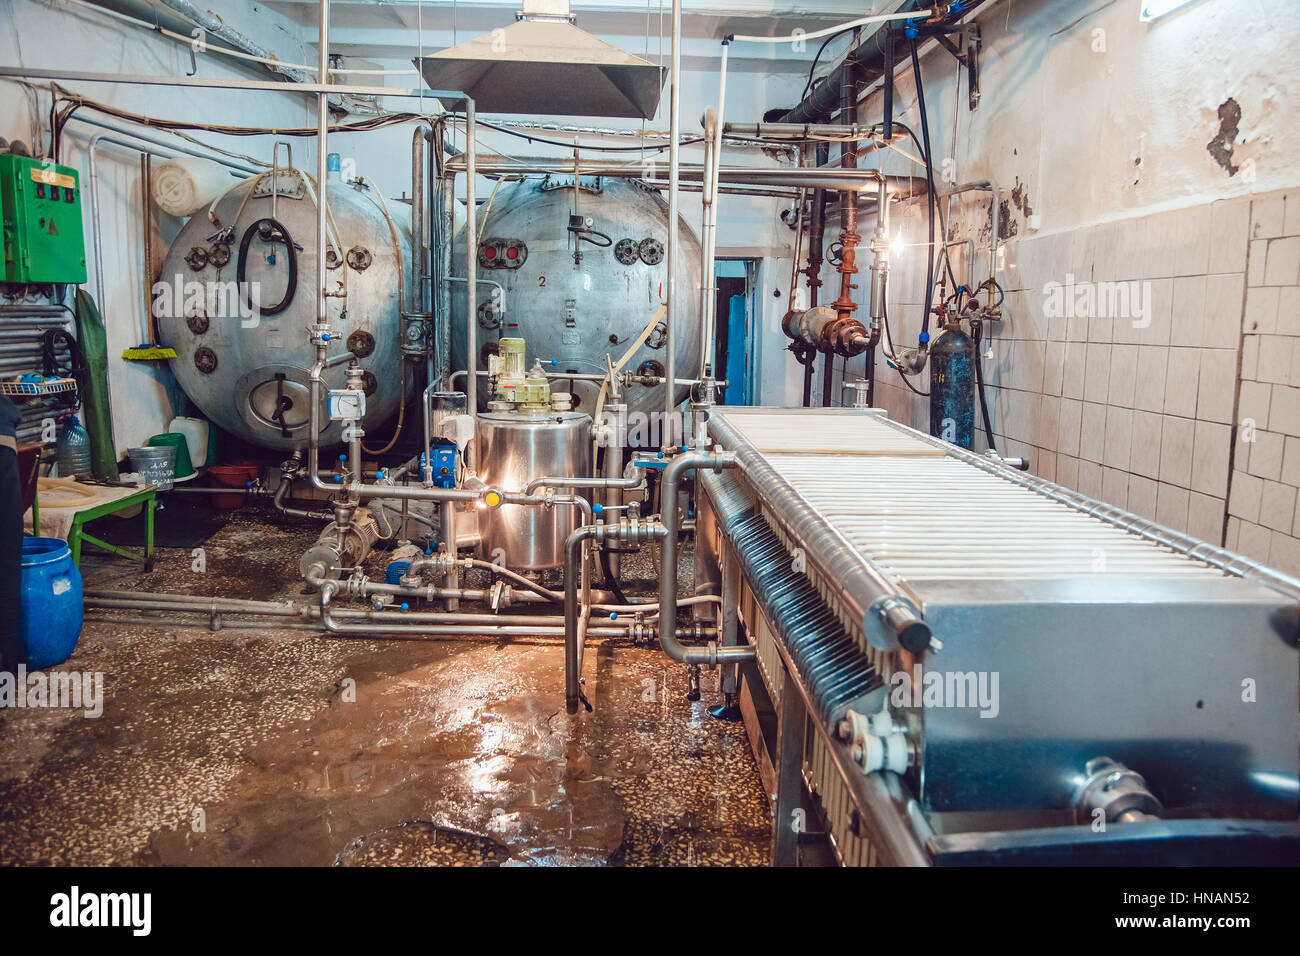 https://c8.alamy.com/comp/HNAN52/old-beer-plant-with-brewing-kettles-vessels-tubs-and-pipes-brewery-HNAN52.jpg